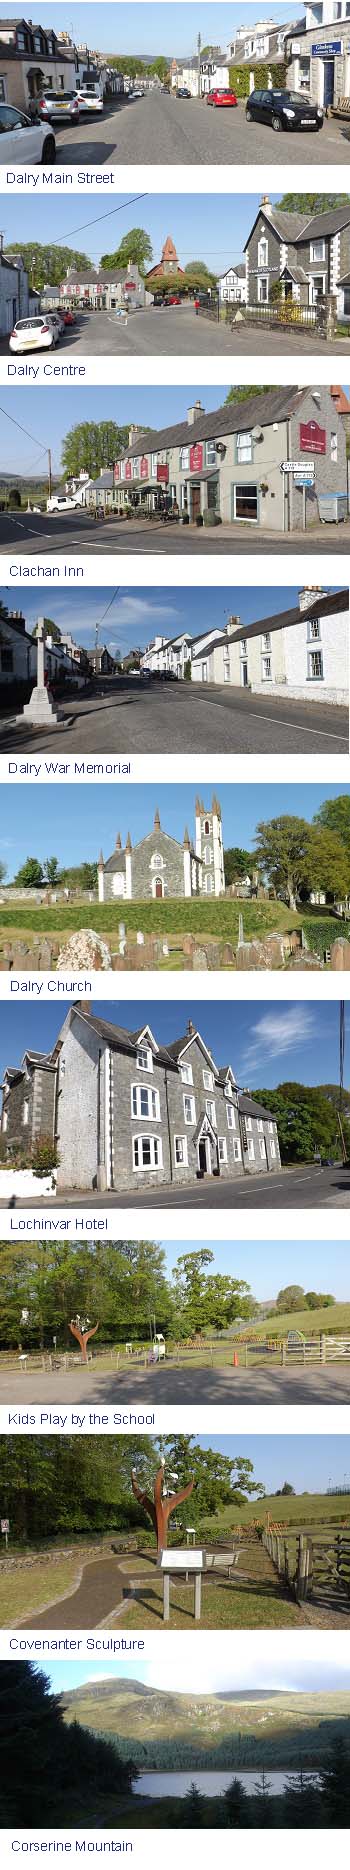 St Johns Town of Dalry Images